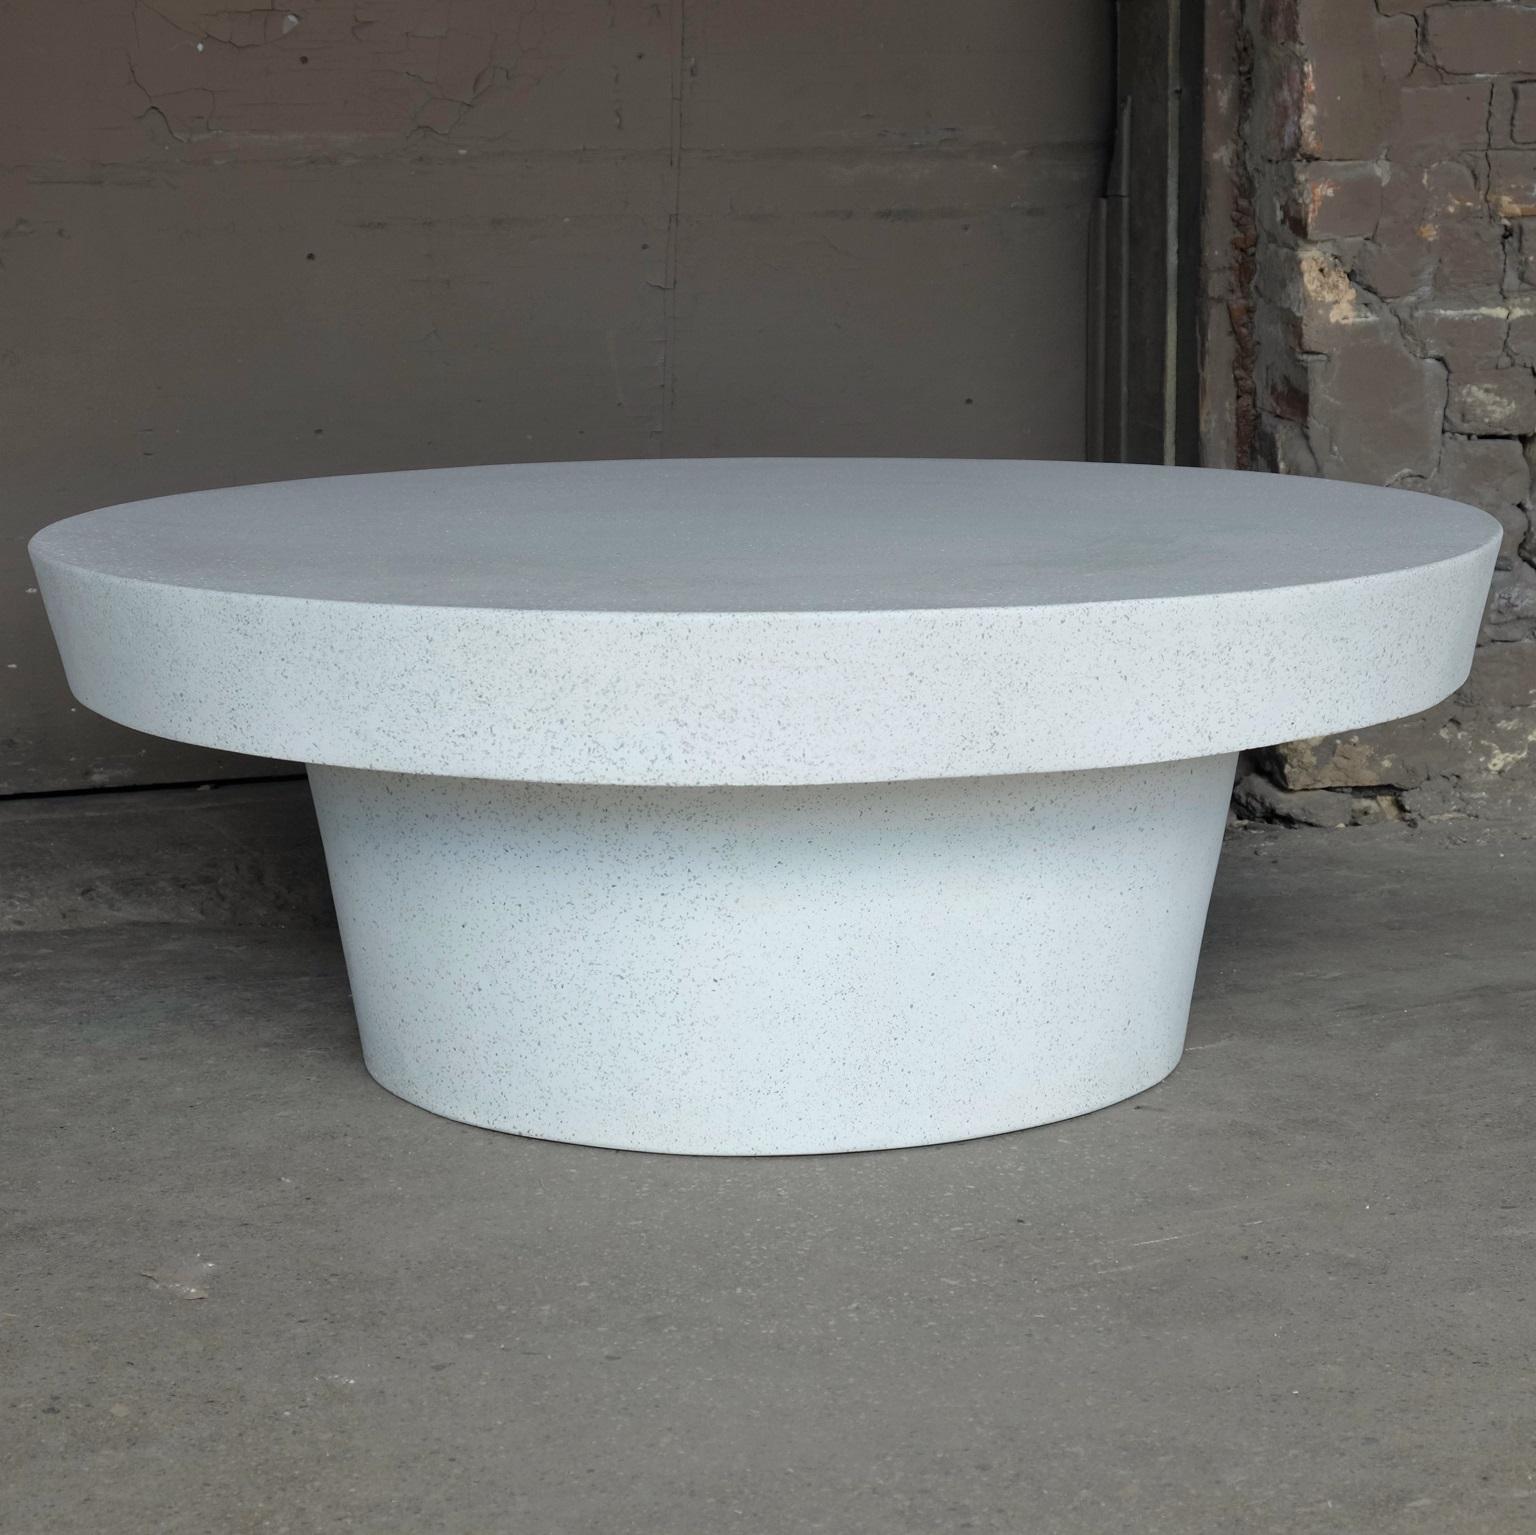 A place of balance and equilibrium. A smooth, beveled edge gently guides the eye around the form, showcasing its fields of stone aggregate.

Dimensions: Diameter 45 in. (114 cm). Height 16 in. (41 cm). Weight 85 lbs. (38.5 kg).

Finish color